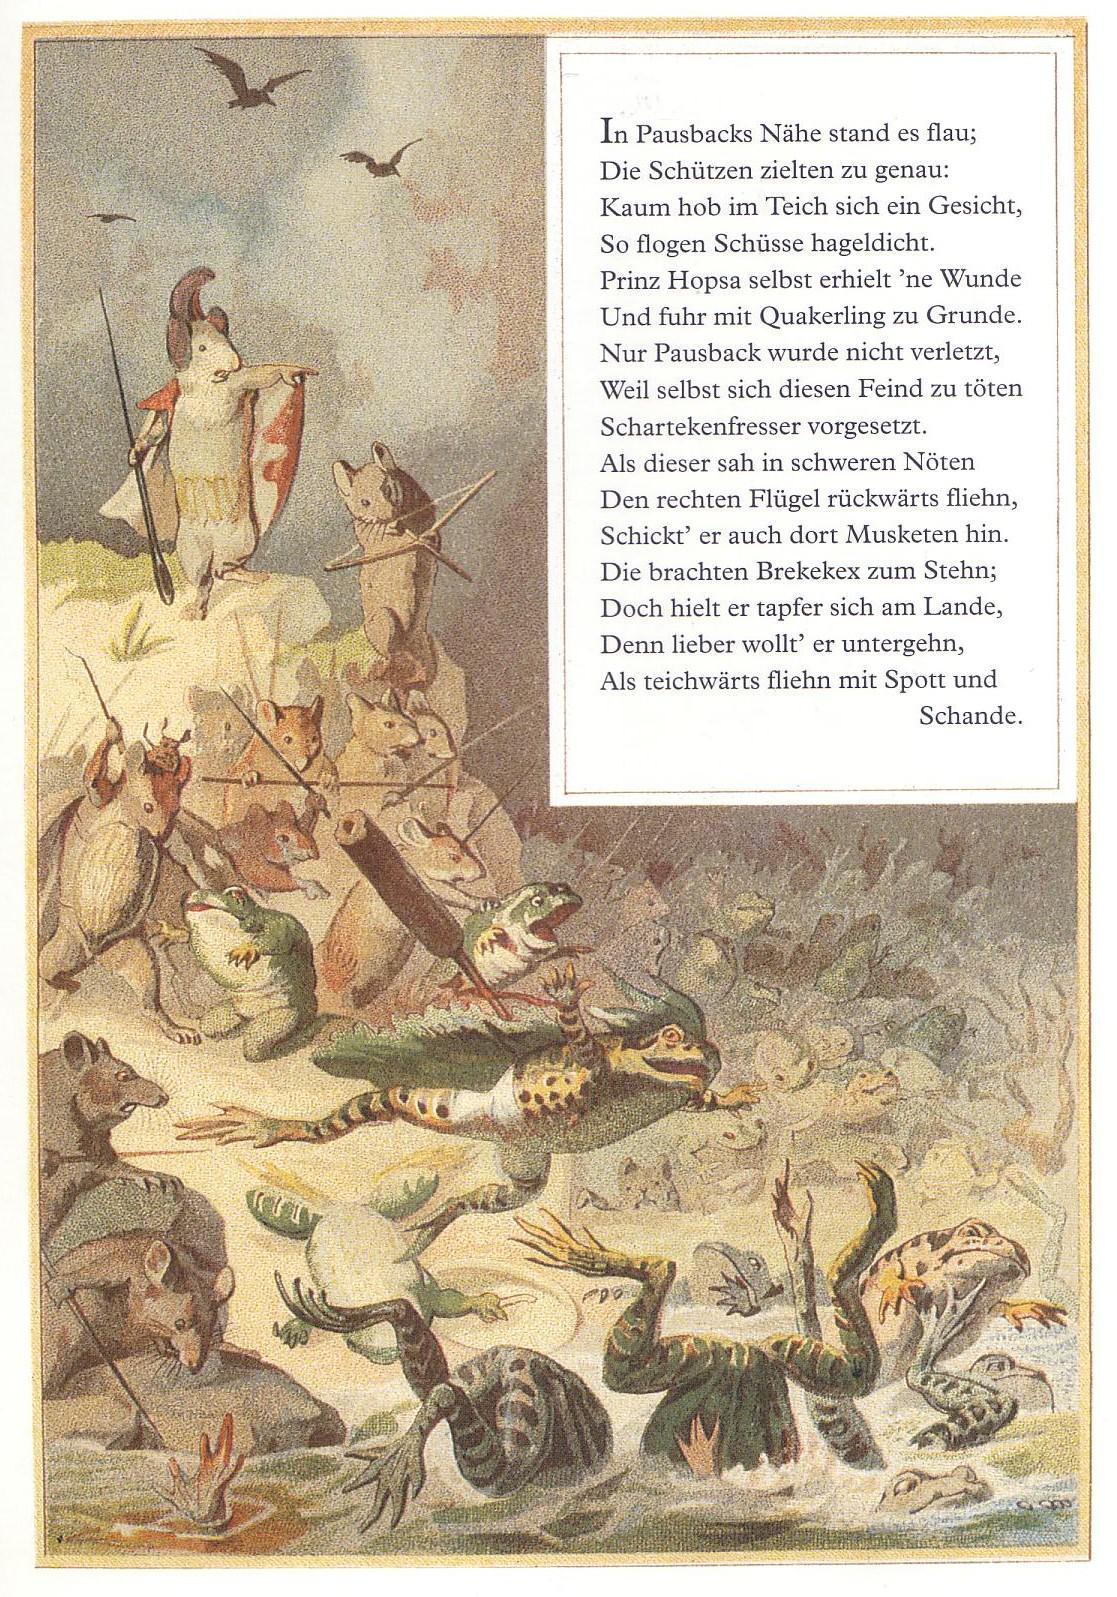 Illustration from an 1878 german edition of Batrachomyomachia (Battle of the Frogs and Mice). A parody of the Illiad and other Greek epics believed to have originally been written in around the 4th century BC.jpg